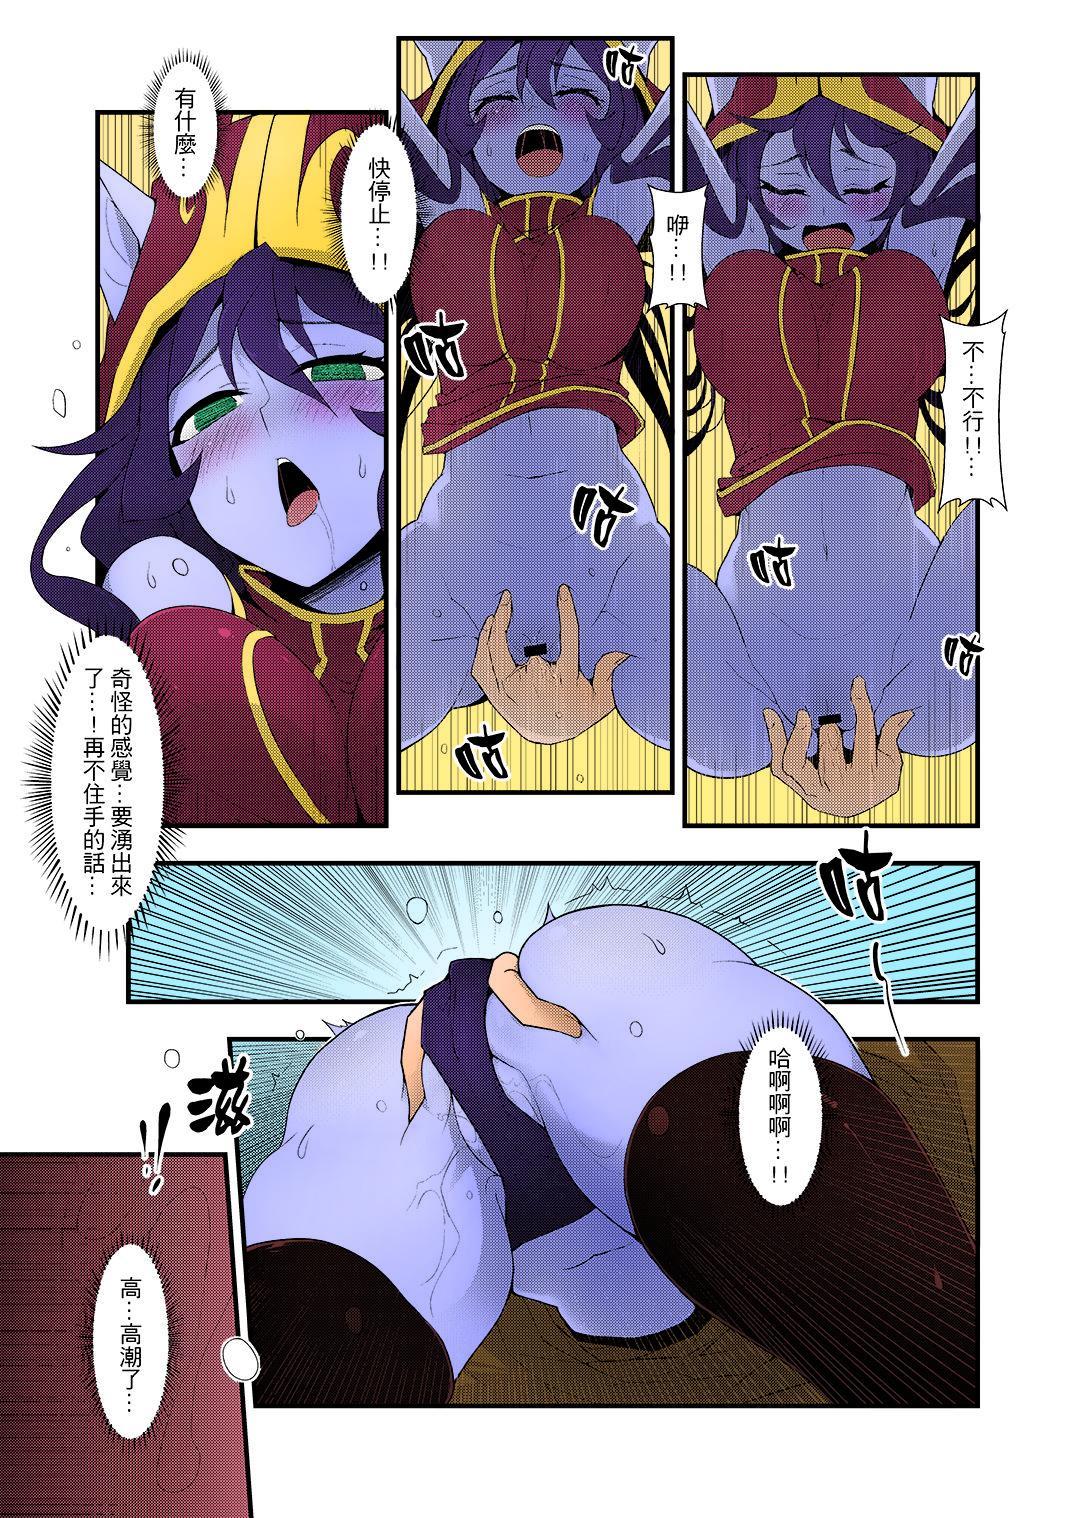 Chinese ININ league 2 - League of legends Uncensored - Page 9